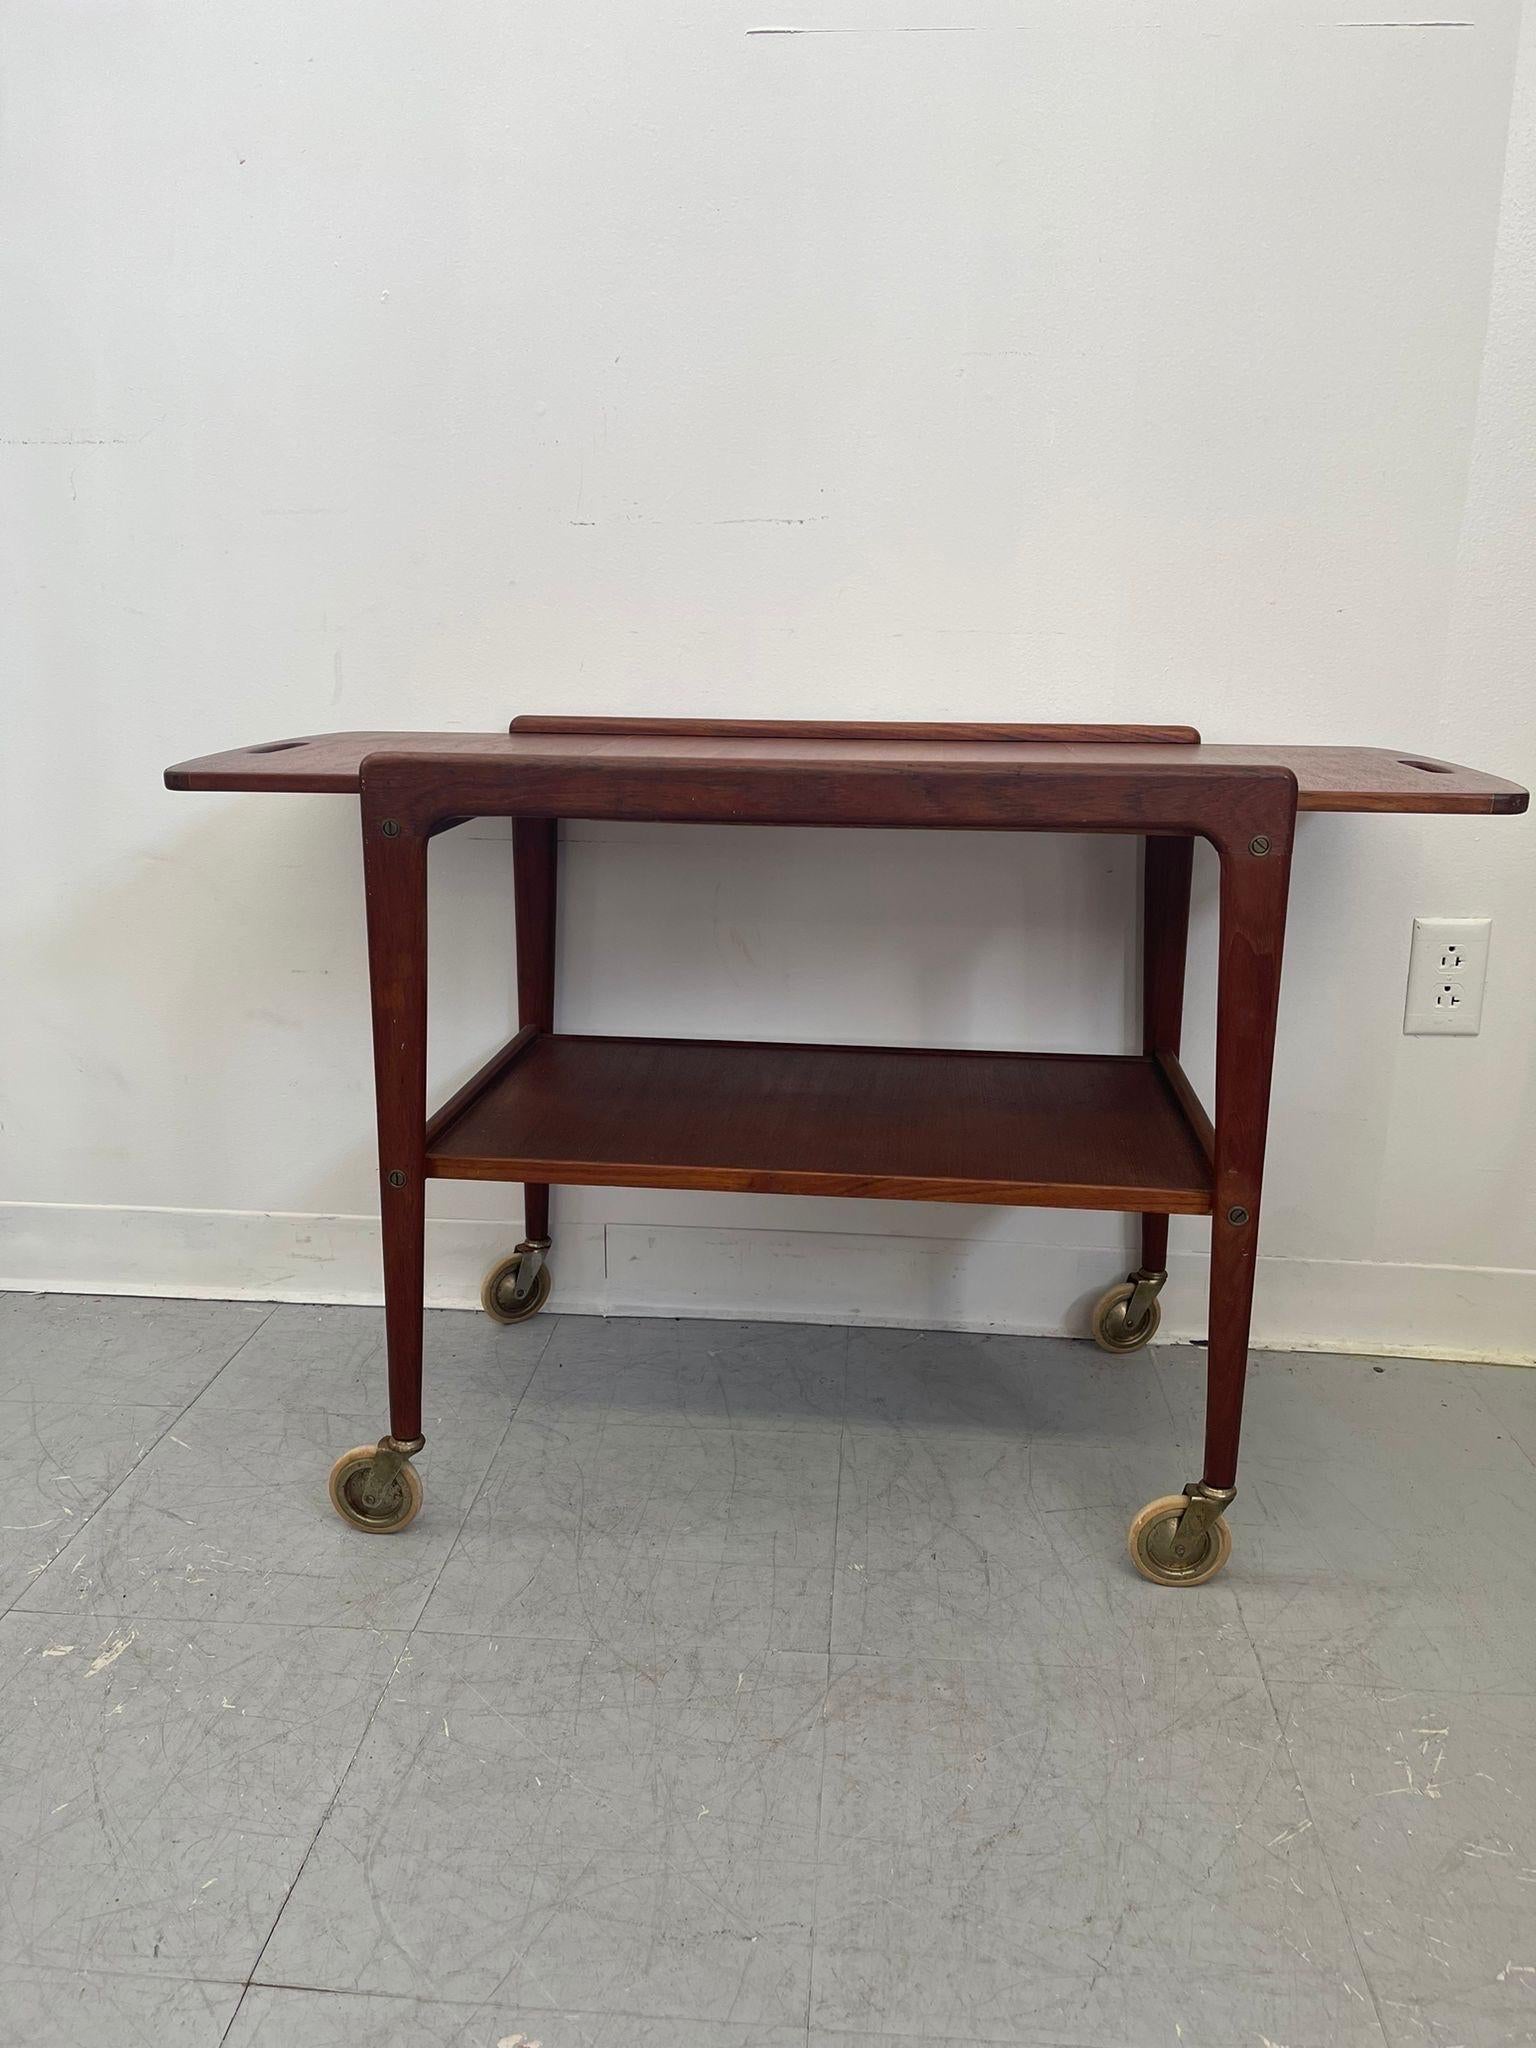 Bar Cart on casters. Possibly Teak. Sleek Danish modern design. Circa 1960s/1970s. Vintage Condition Consistent with Age as Pictured.

Dimensions. 39 1/2 W ; 16 1/2 D ; 24 H